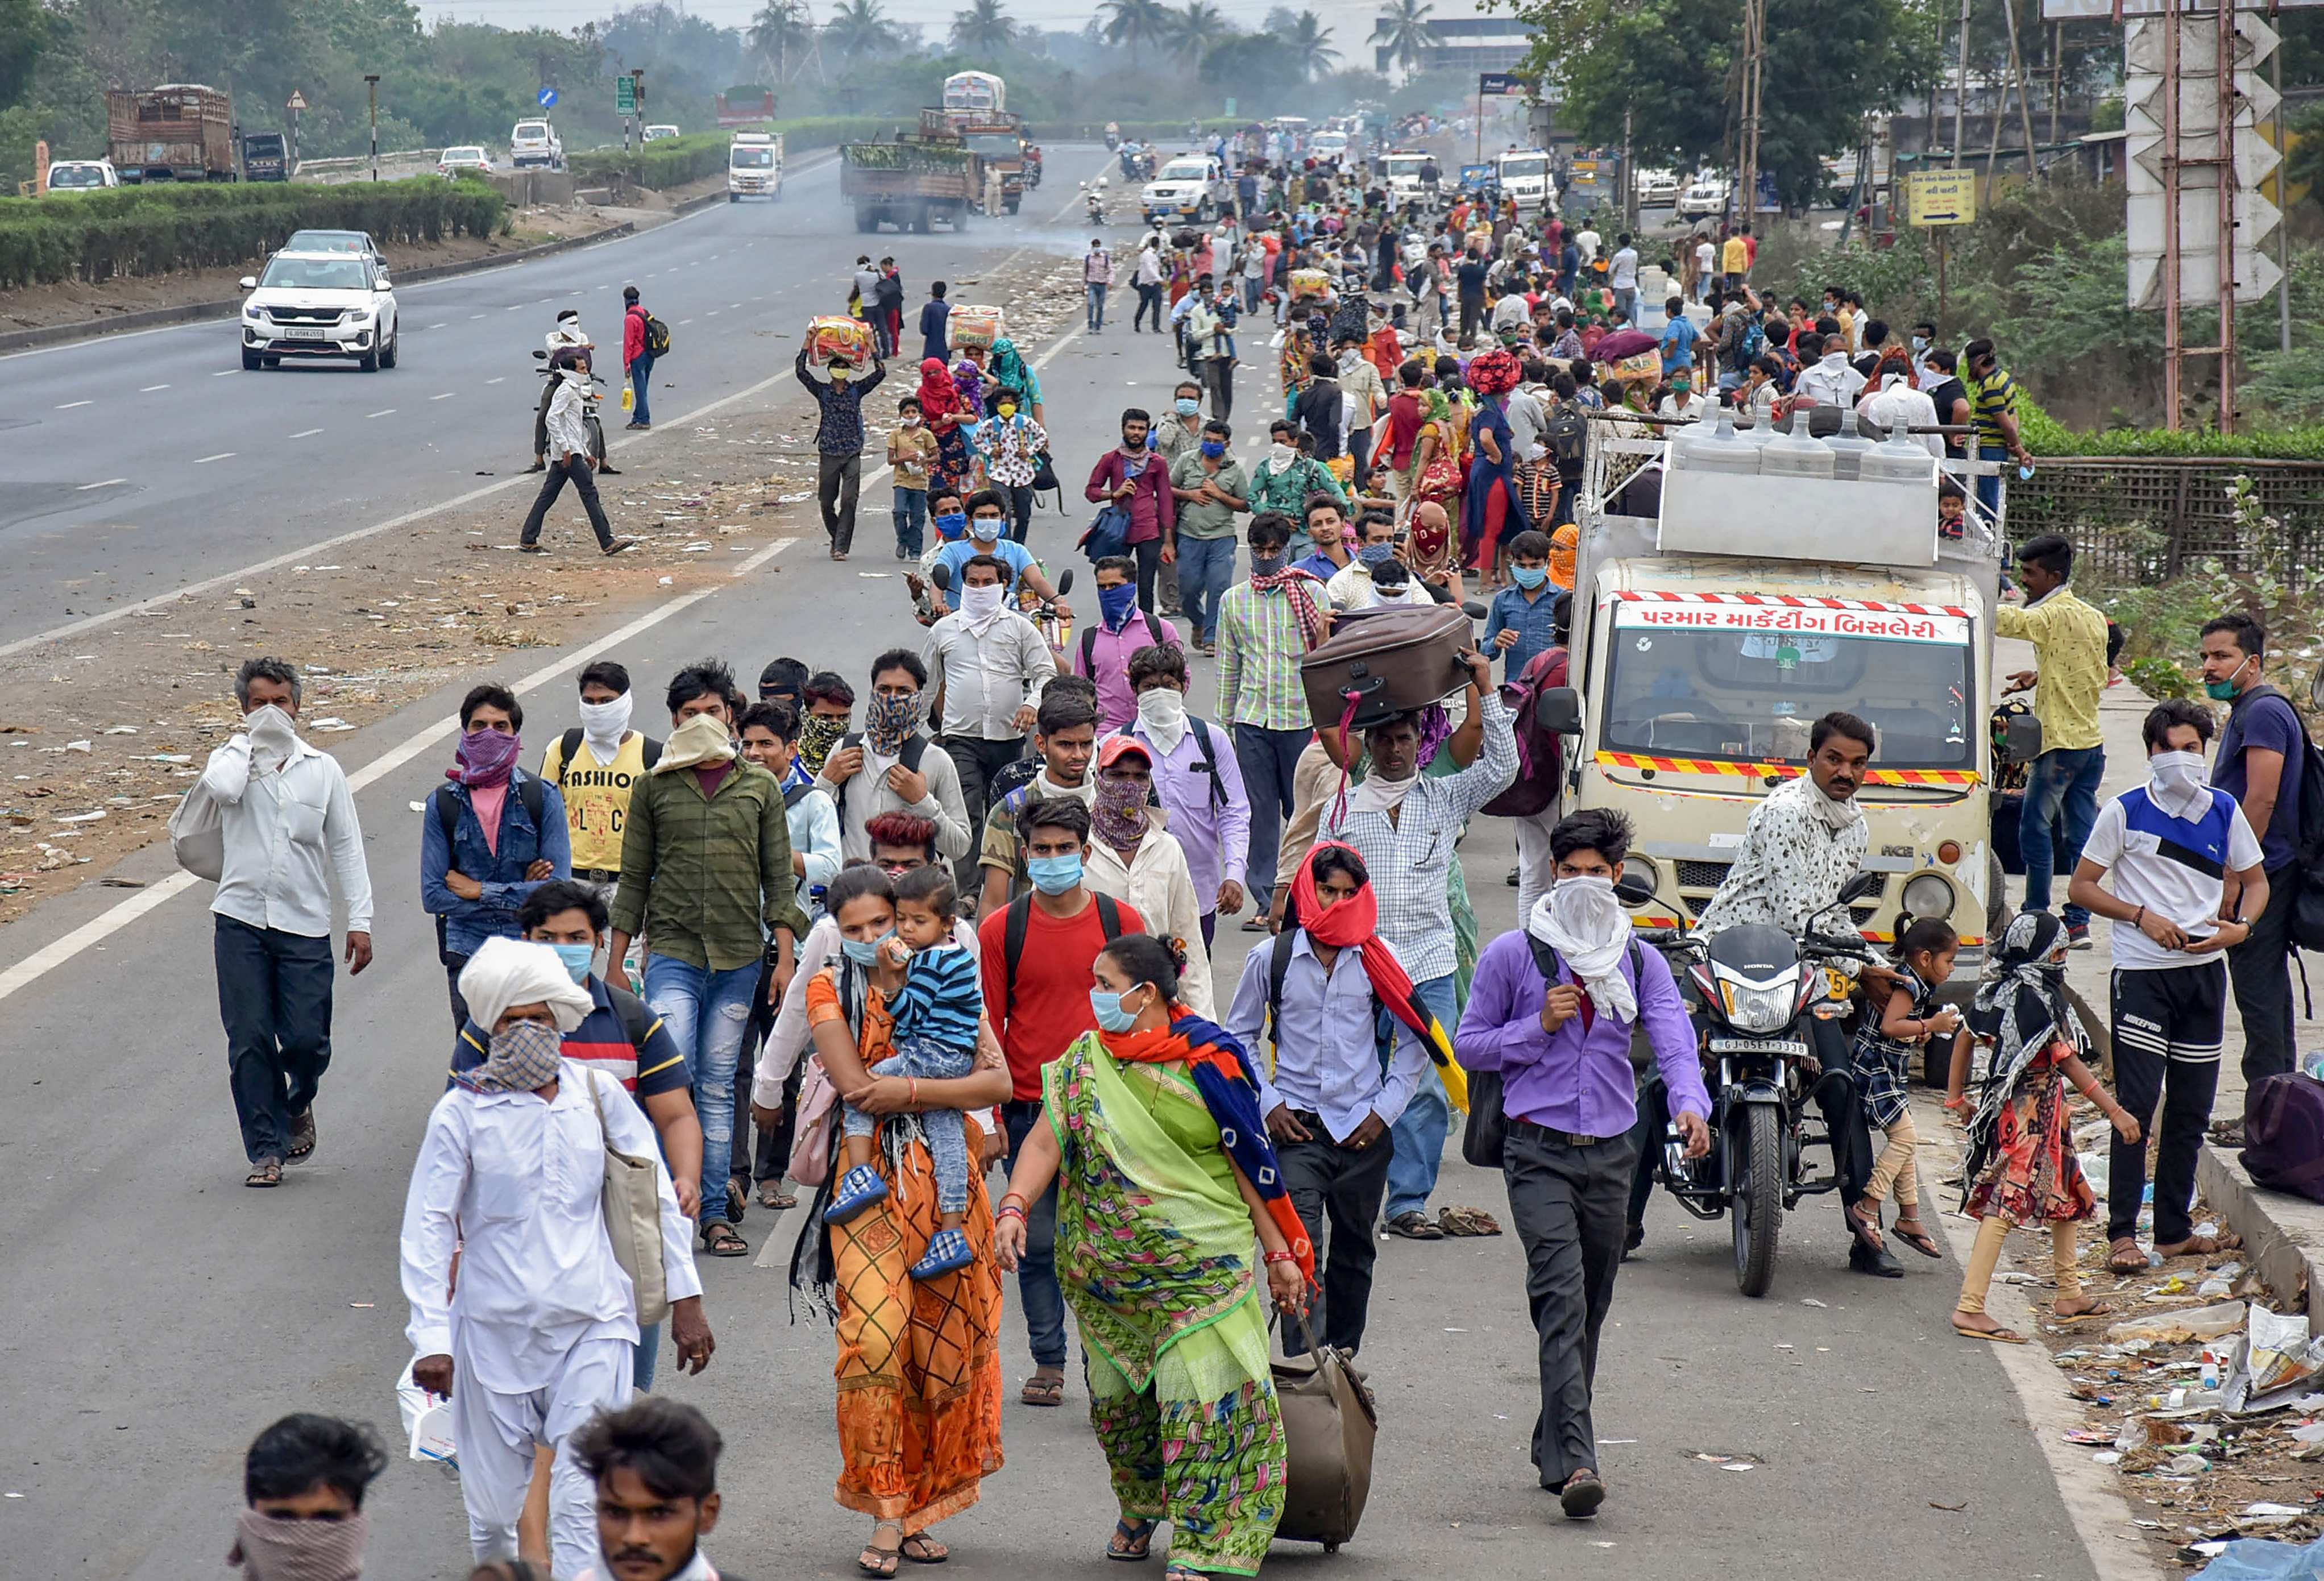 Surat: Migrant workers and their families walk on a road to return to their villages after the government imposed a 21-day nationwide lockdown. (Credit: PTI)